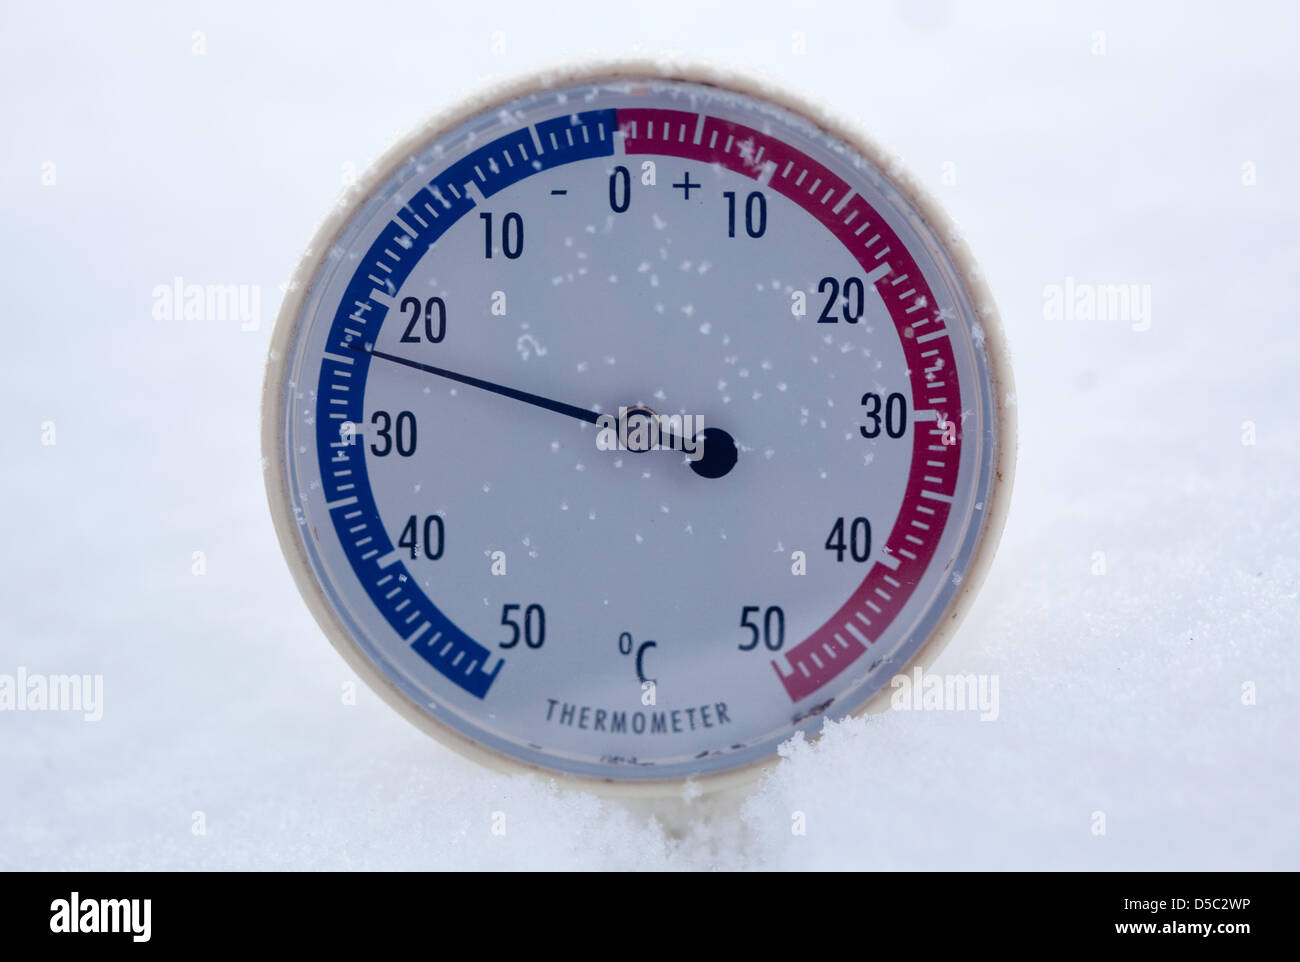 https://c8.alamy.com/comp/D5C2WP/a-thermometer-displays-minus-24-degrees-celcius-in-sieversdorf-germany-D5C2WP.jpg